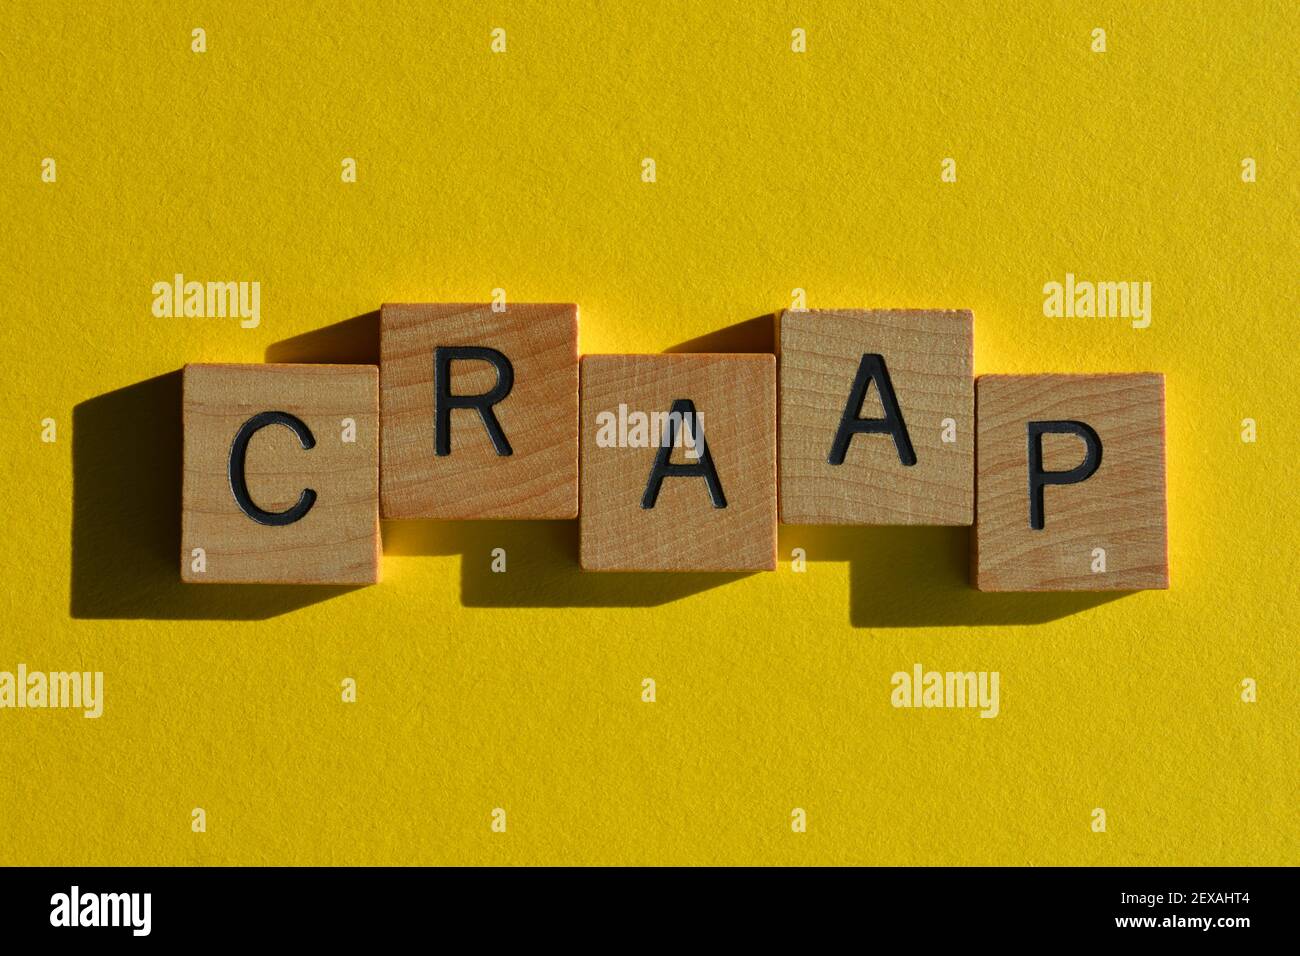 craap, business acronym for Currency, Relevance, Authority, Accuracy, and Purpose Stock Photo